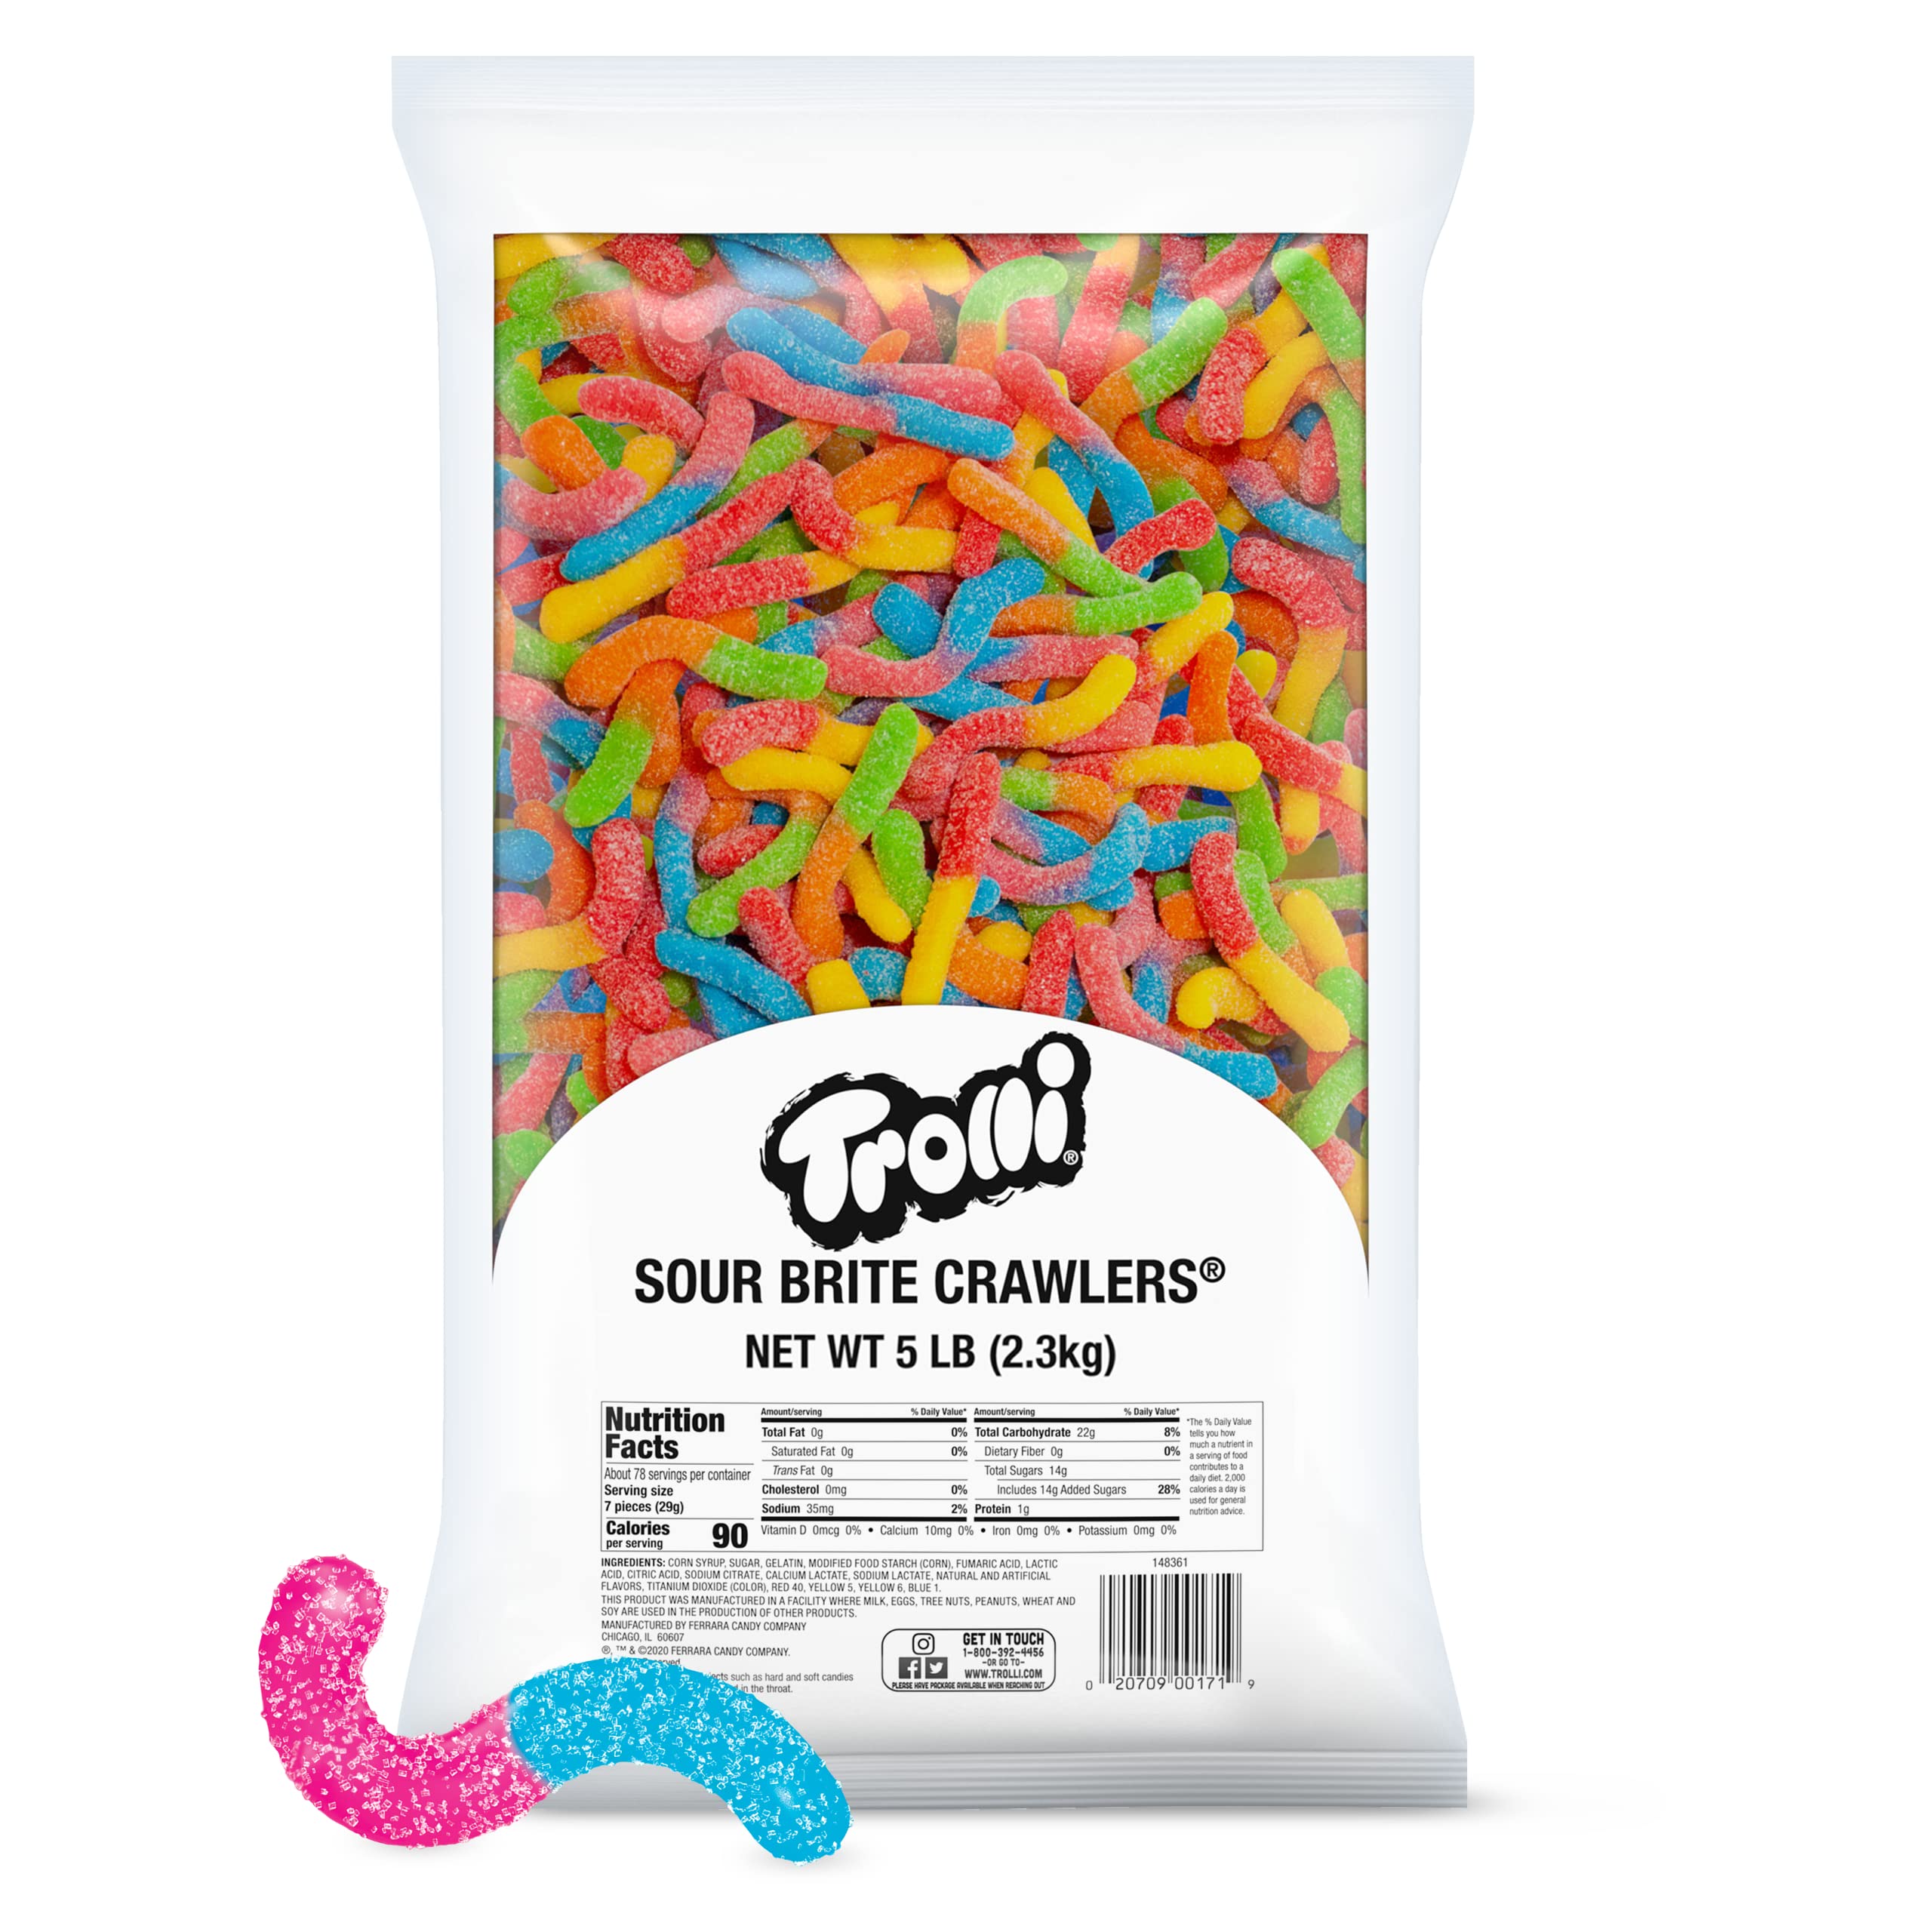 brian dworkin recommends 2 Foot Gummy Worm